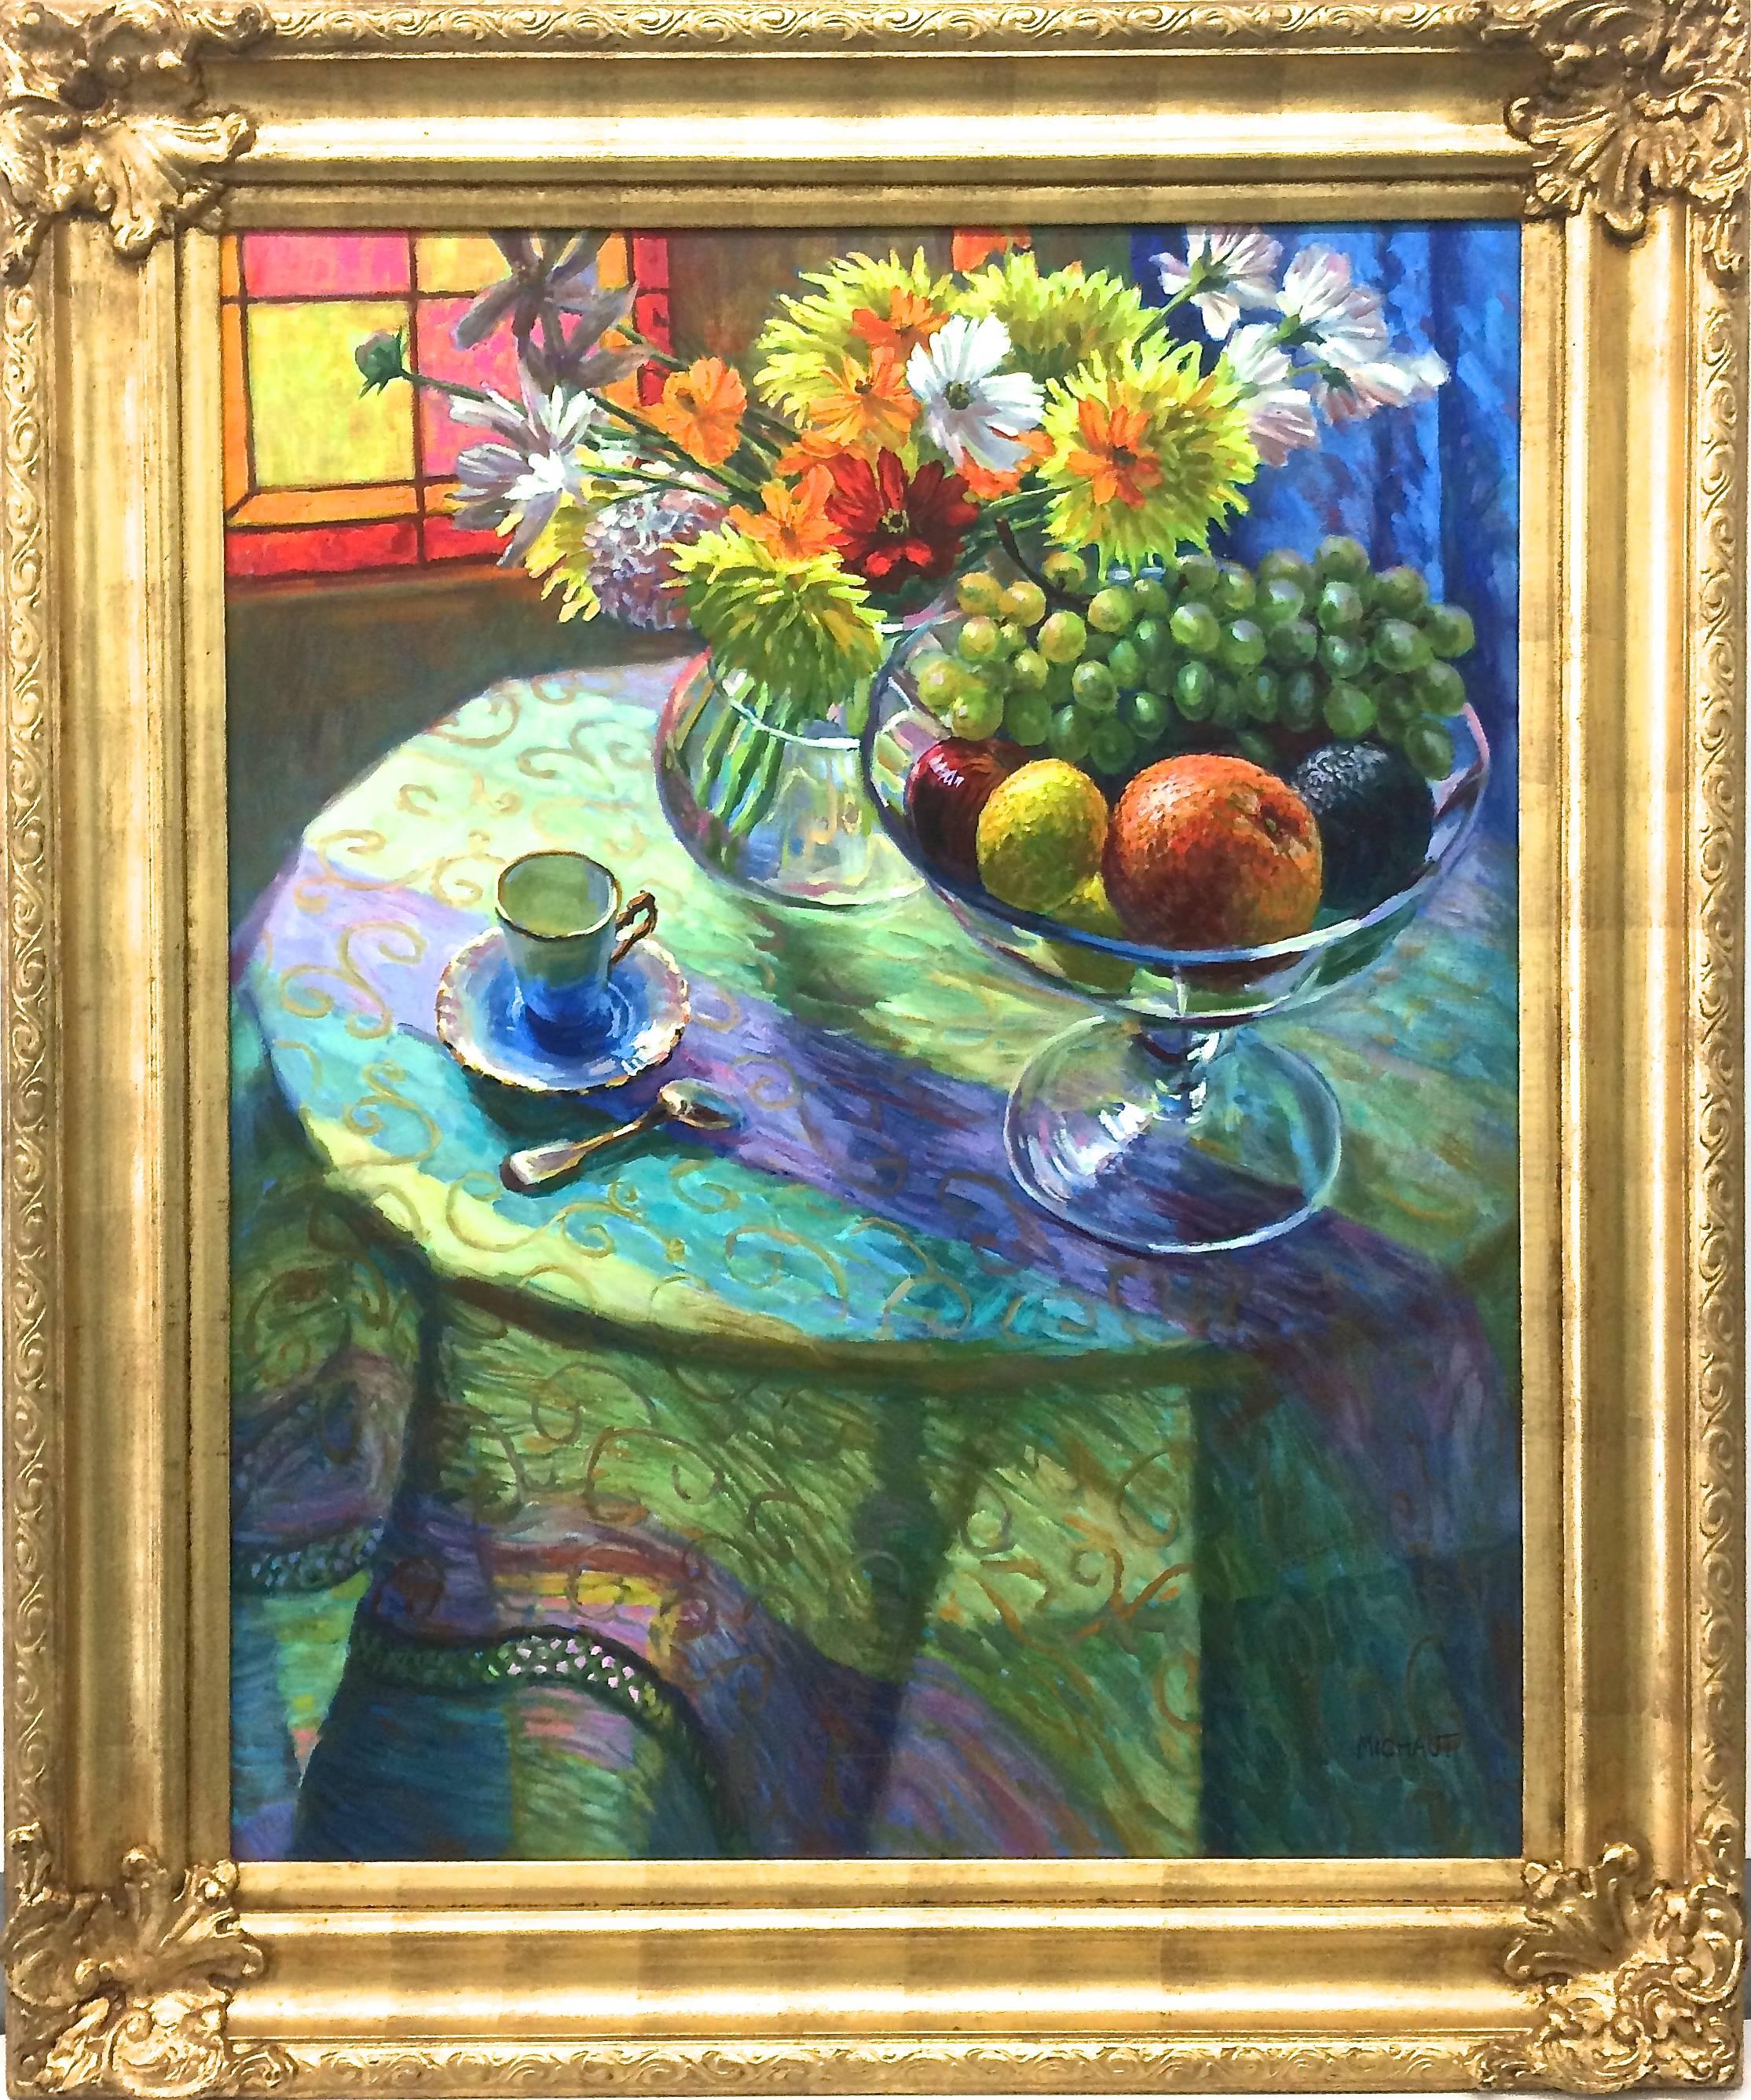 Impressionistic Still Life With Fruit And Flowers